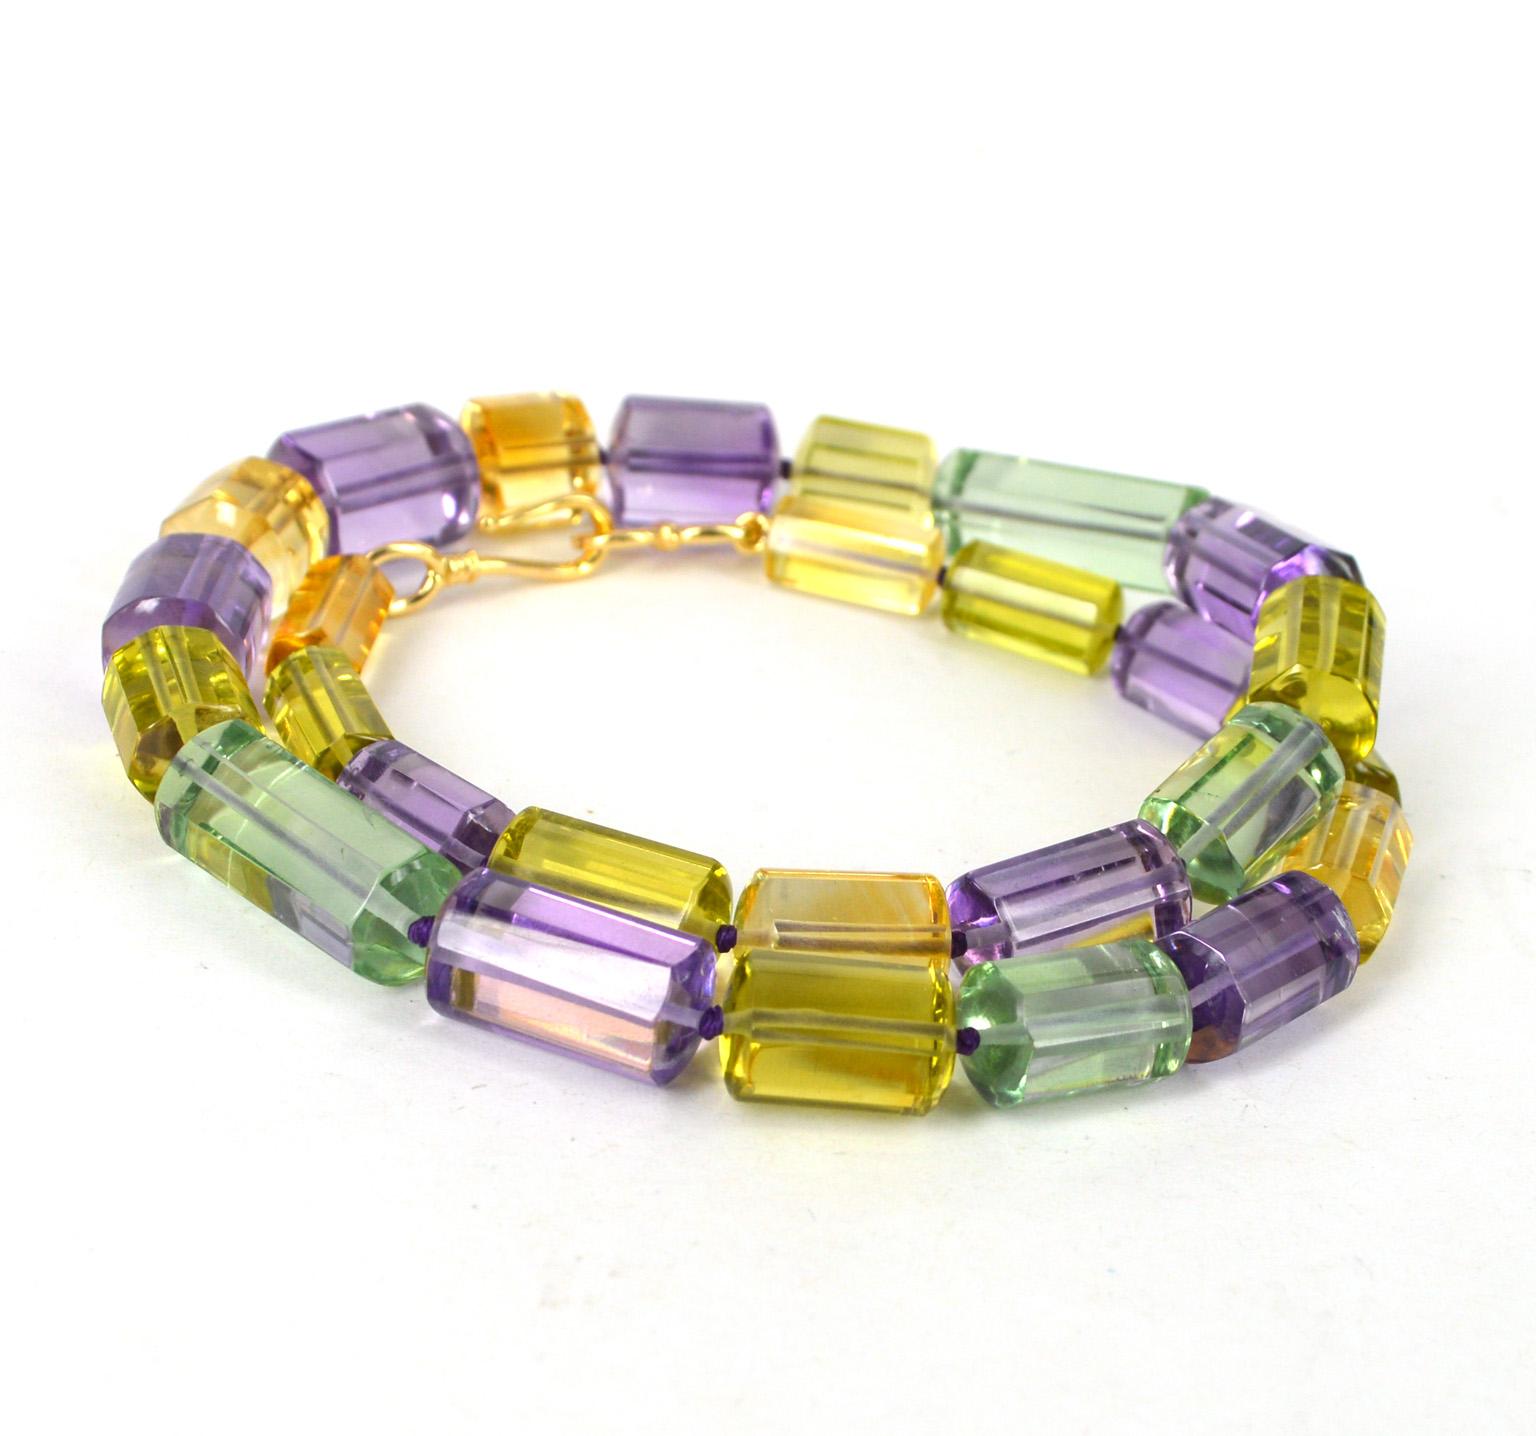 High quality polished 8 sided tube beads of Amethyst, Green Amethyst, Lemon Quartz and Citrine hand knotted on purple thread. Tubes graduate from 15x7mm with the center bead 16.6x11mm. 
24ct Gold Plate Hook Clasp
